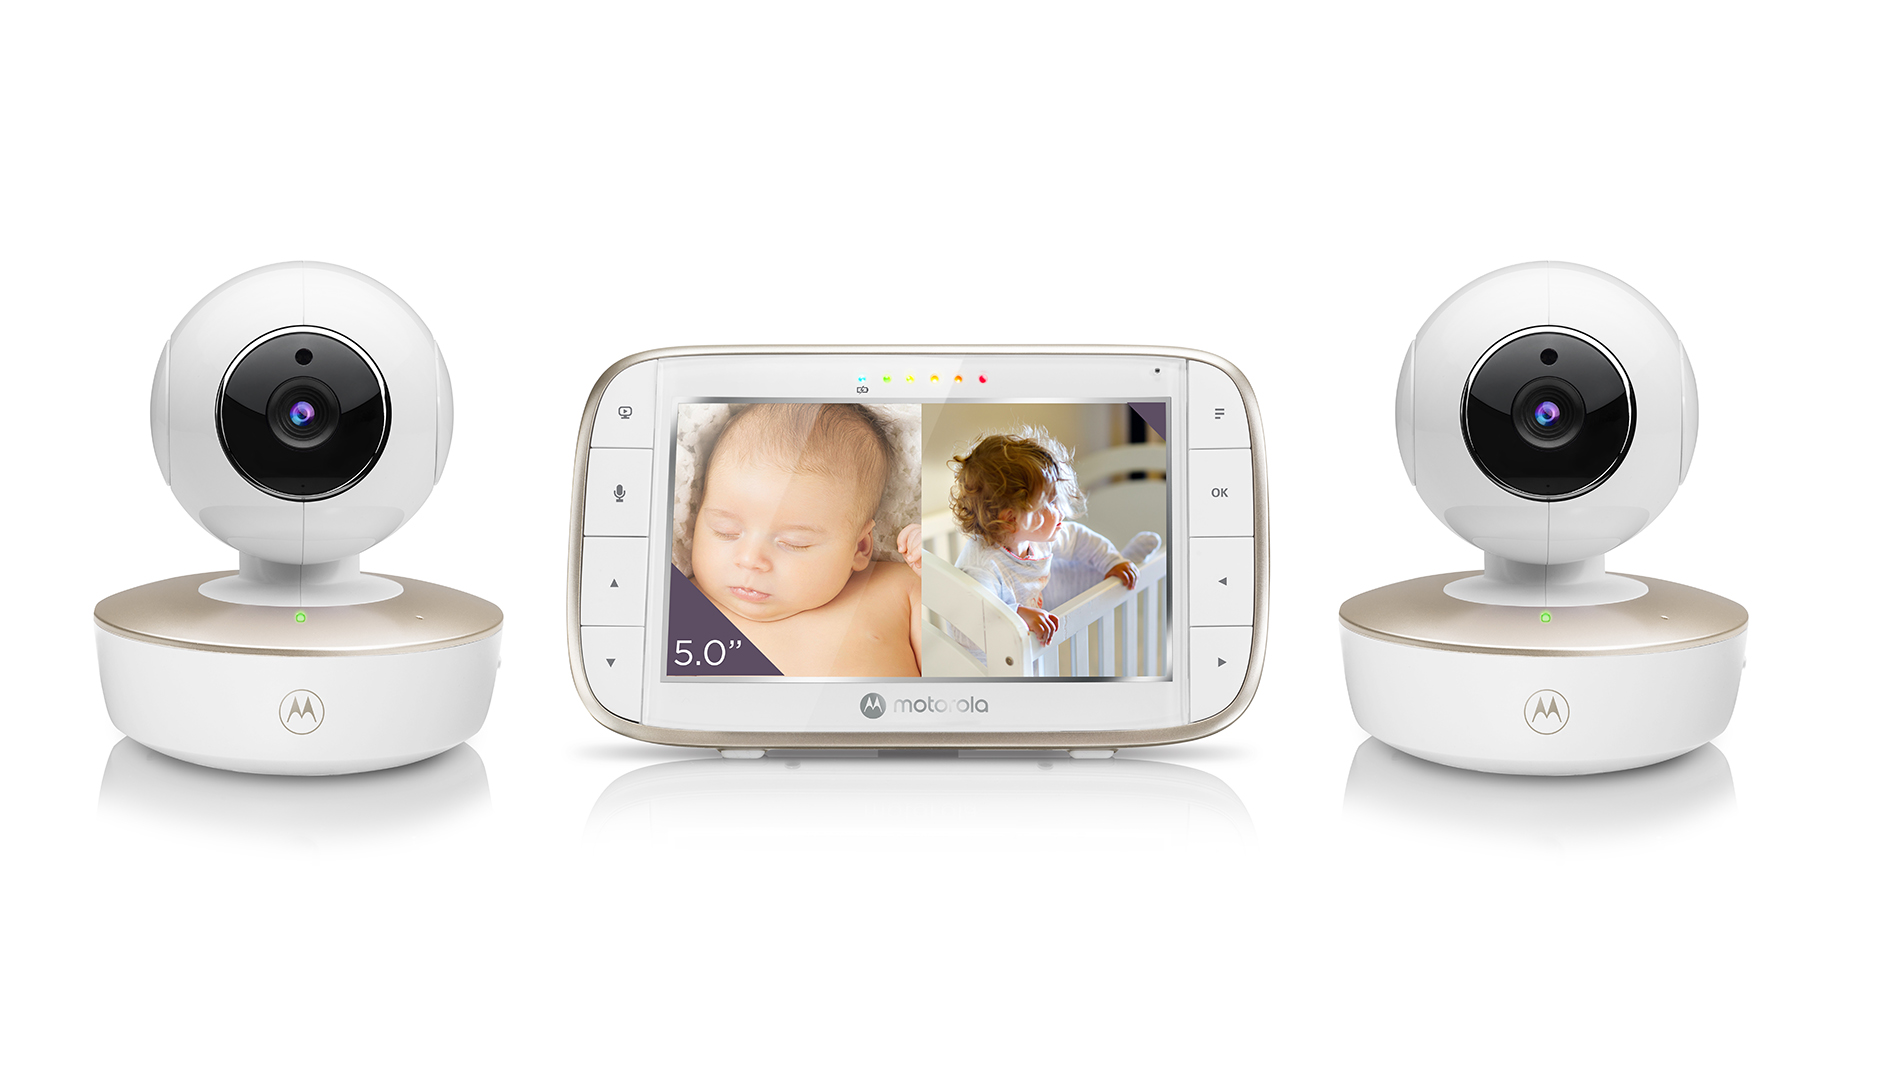 VM855-2 CONNECT Split Screen 5.0 inch Wi-Fi® Video Baby Monitor - 2 camera set - Product image